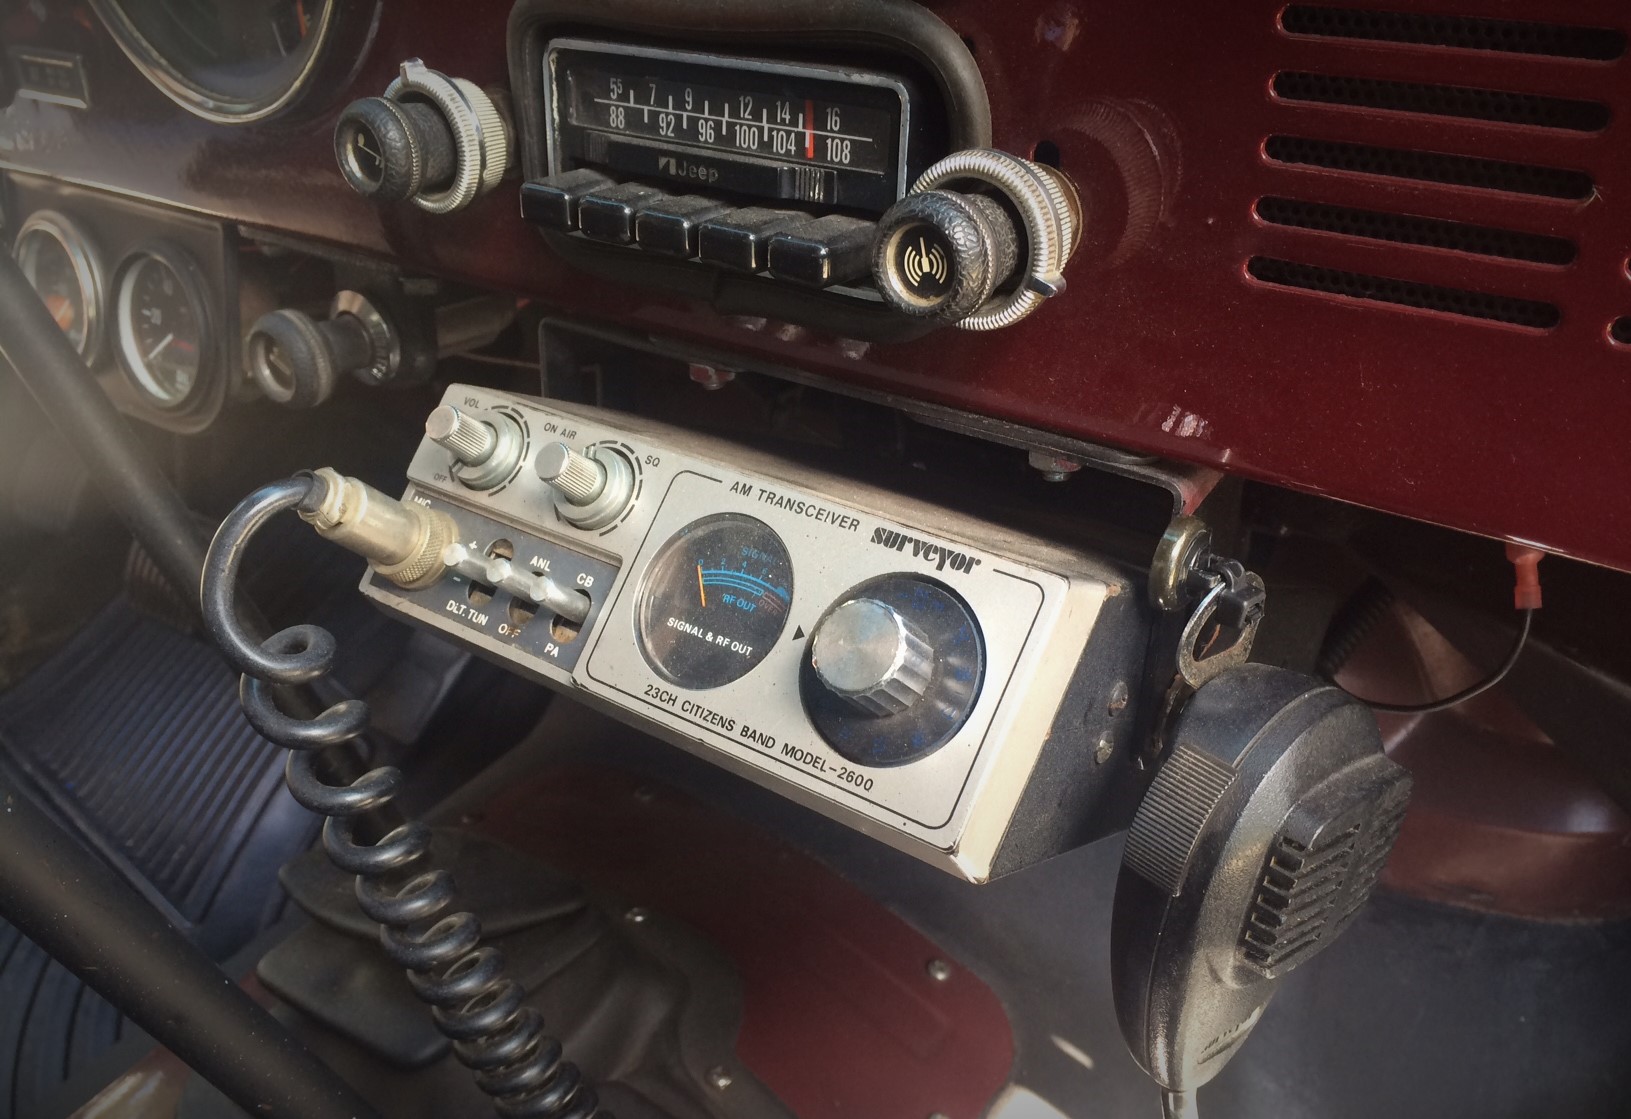 10-4 Good Buddy! Here are 5 Basic Mobile CB Radio Installation Tips